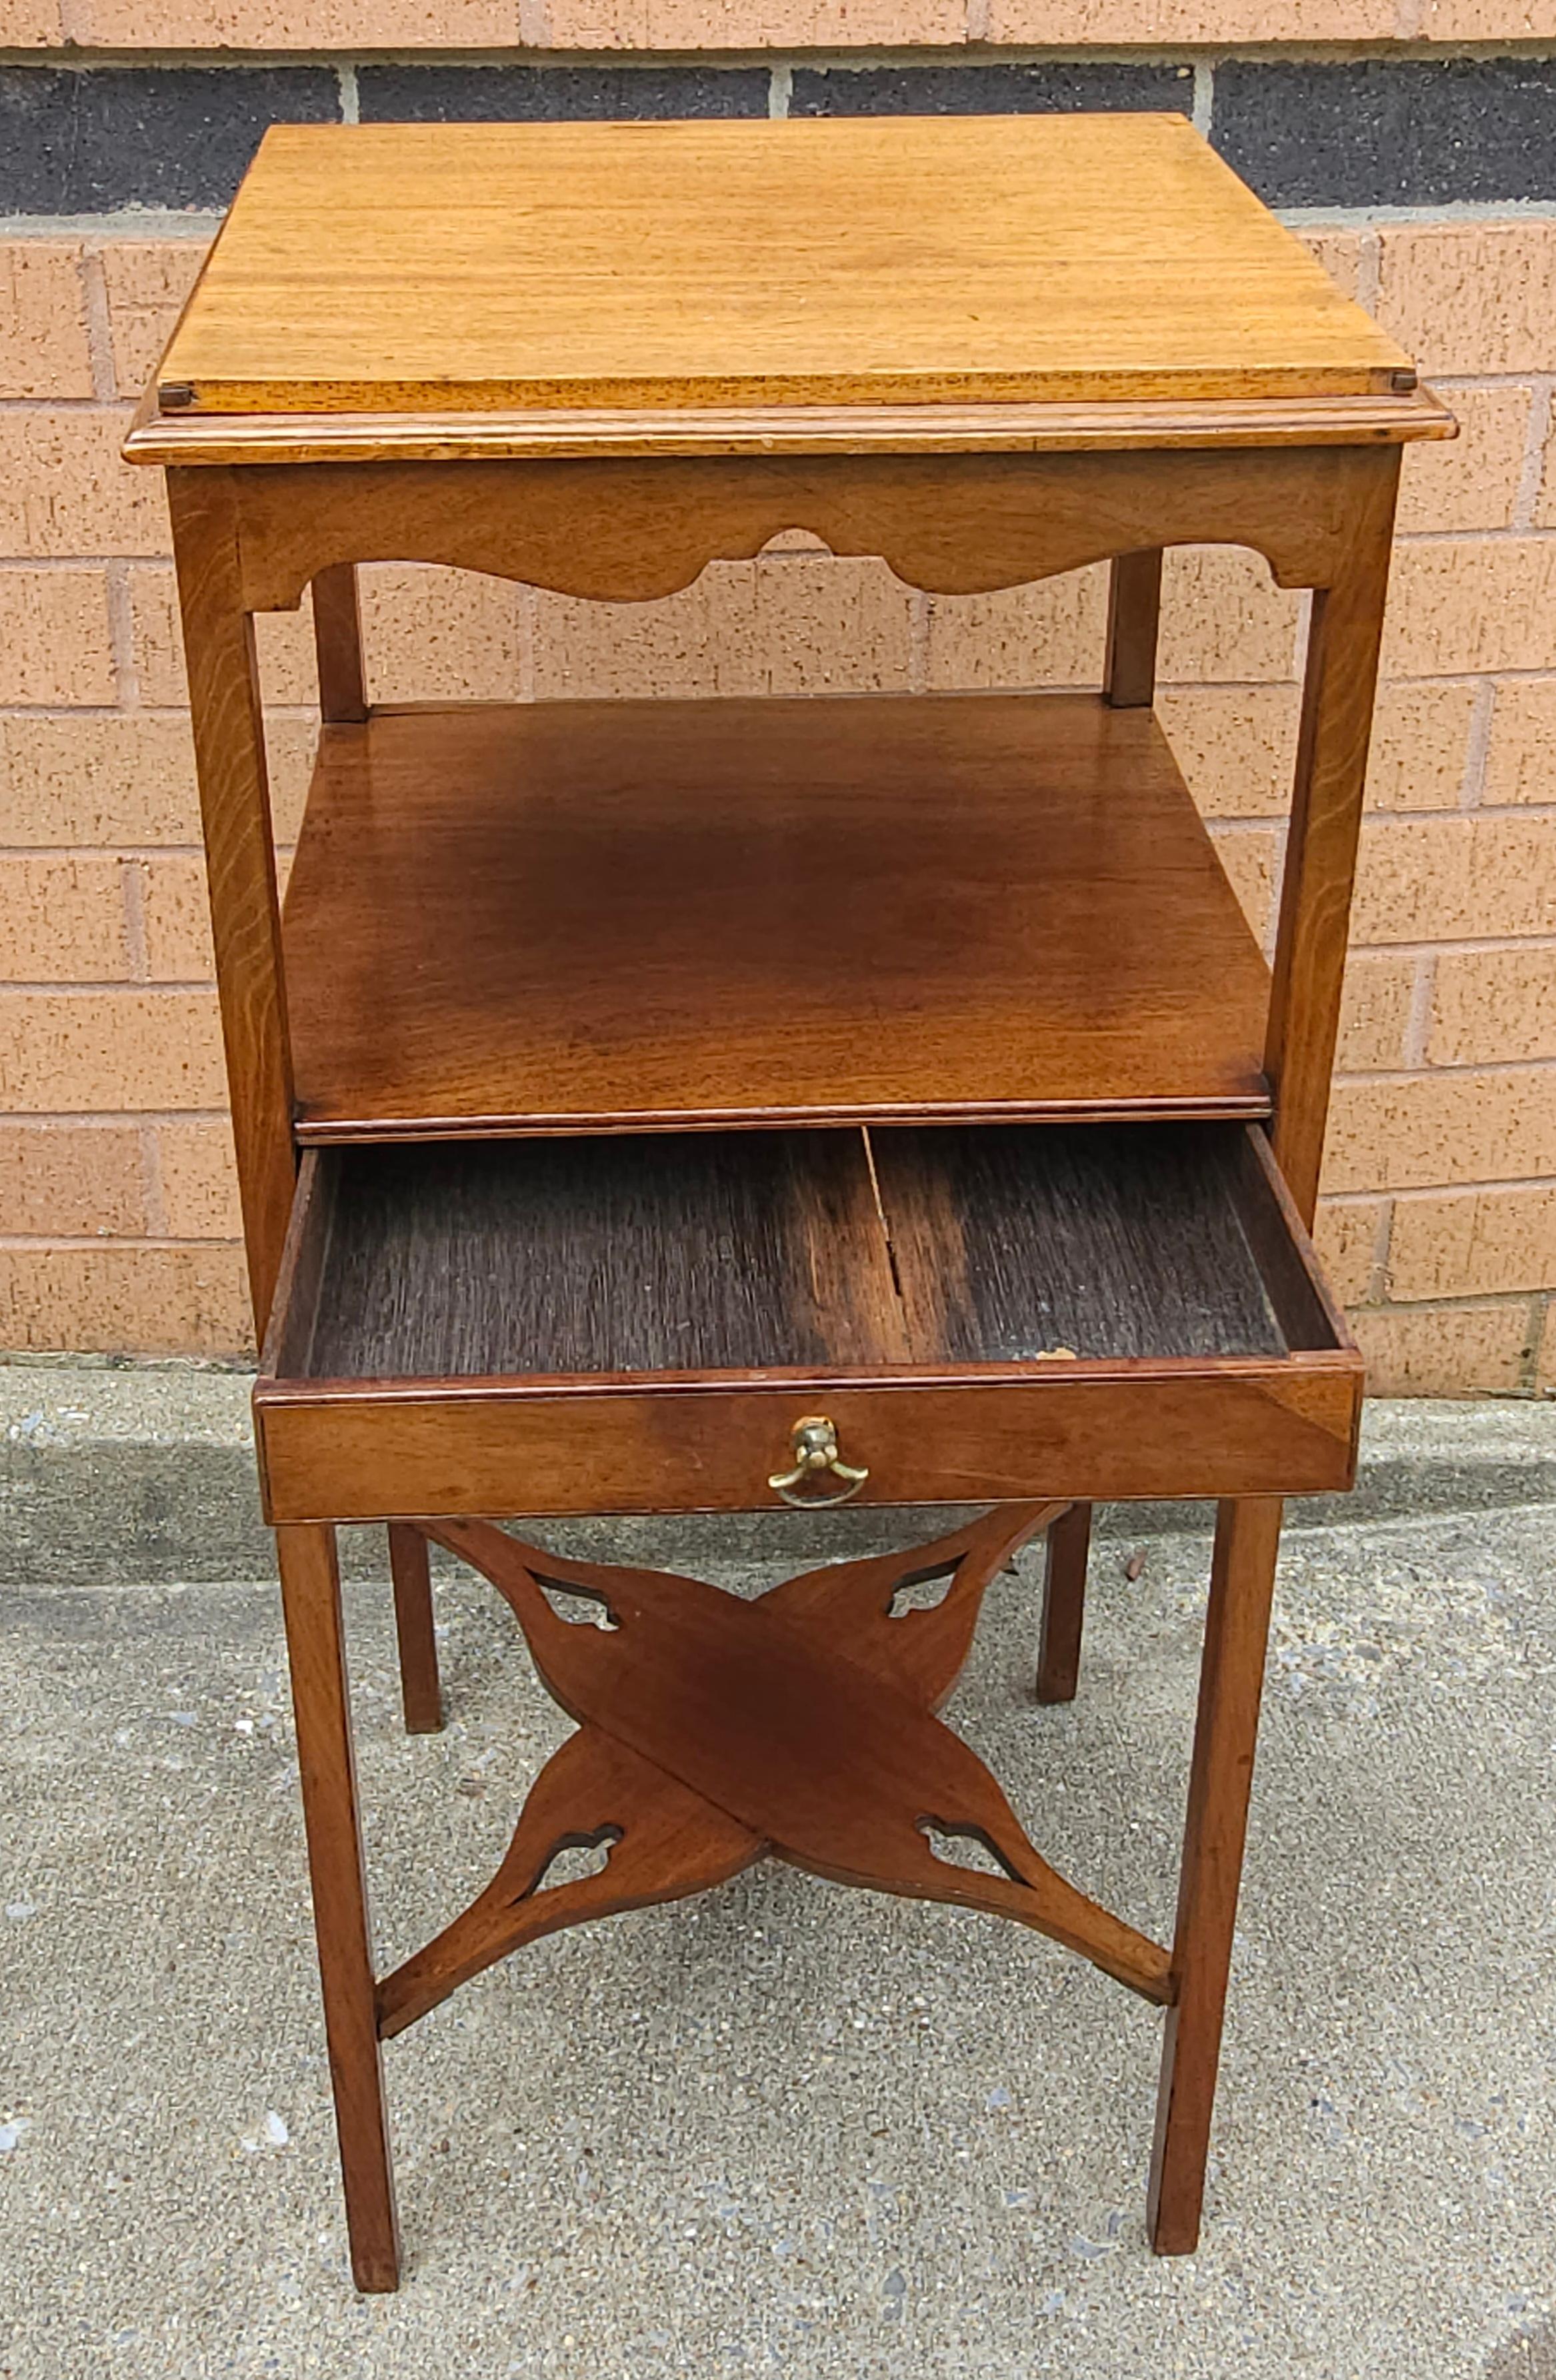 An Early 20th Century Georgian Style Three Tier Single Drawer Mahogany Side Table
Tables measures 15